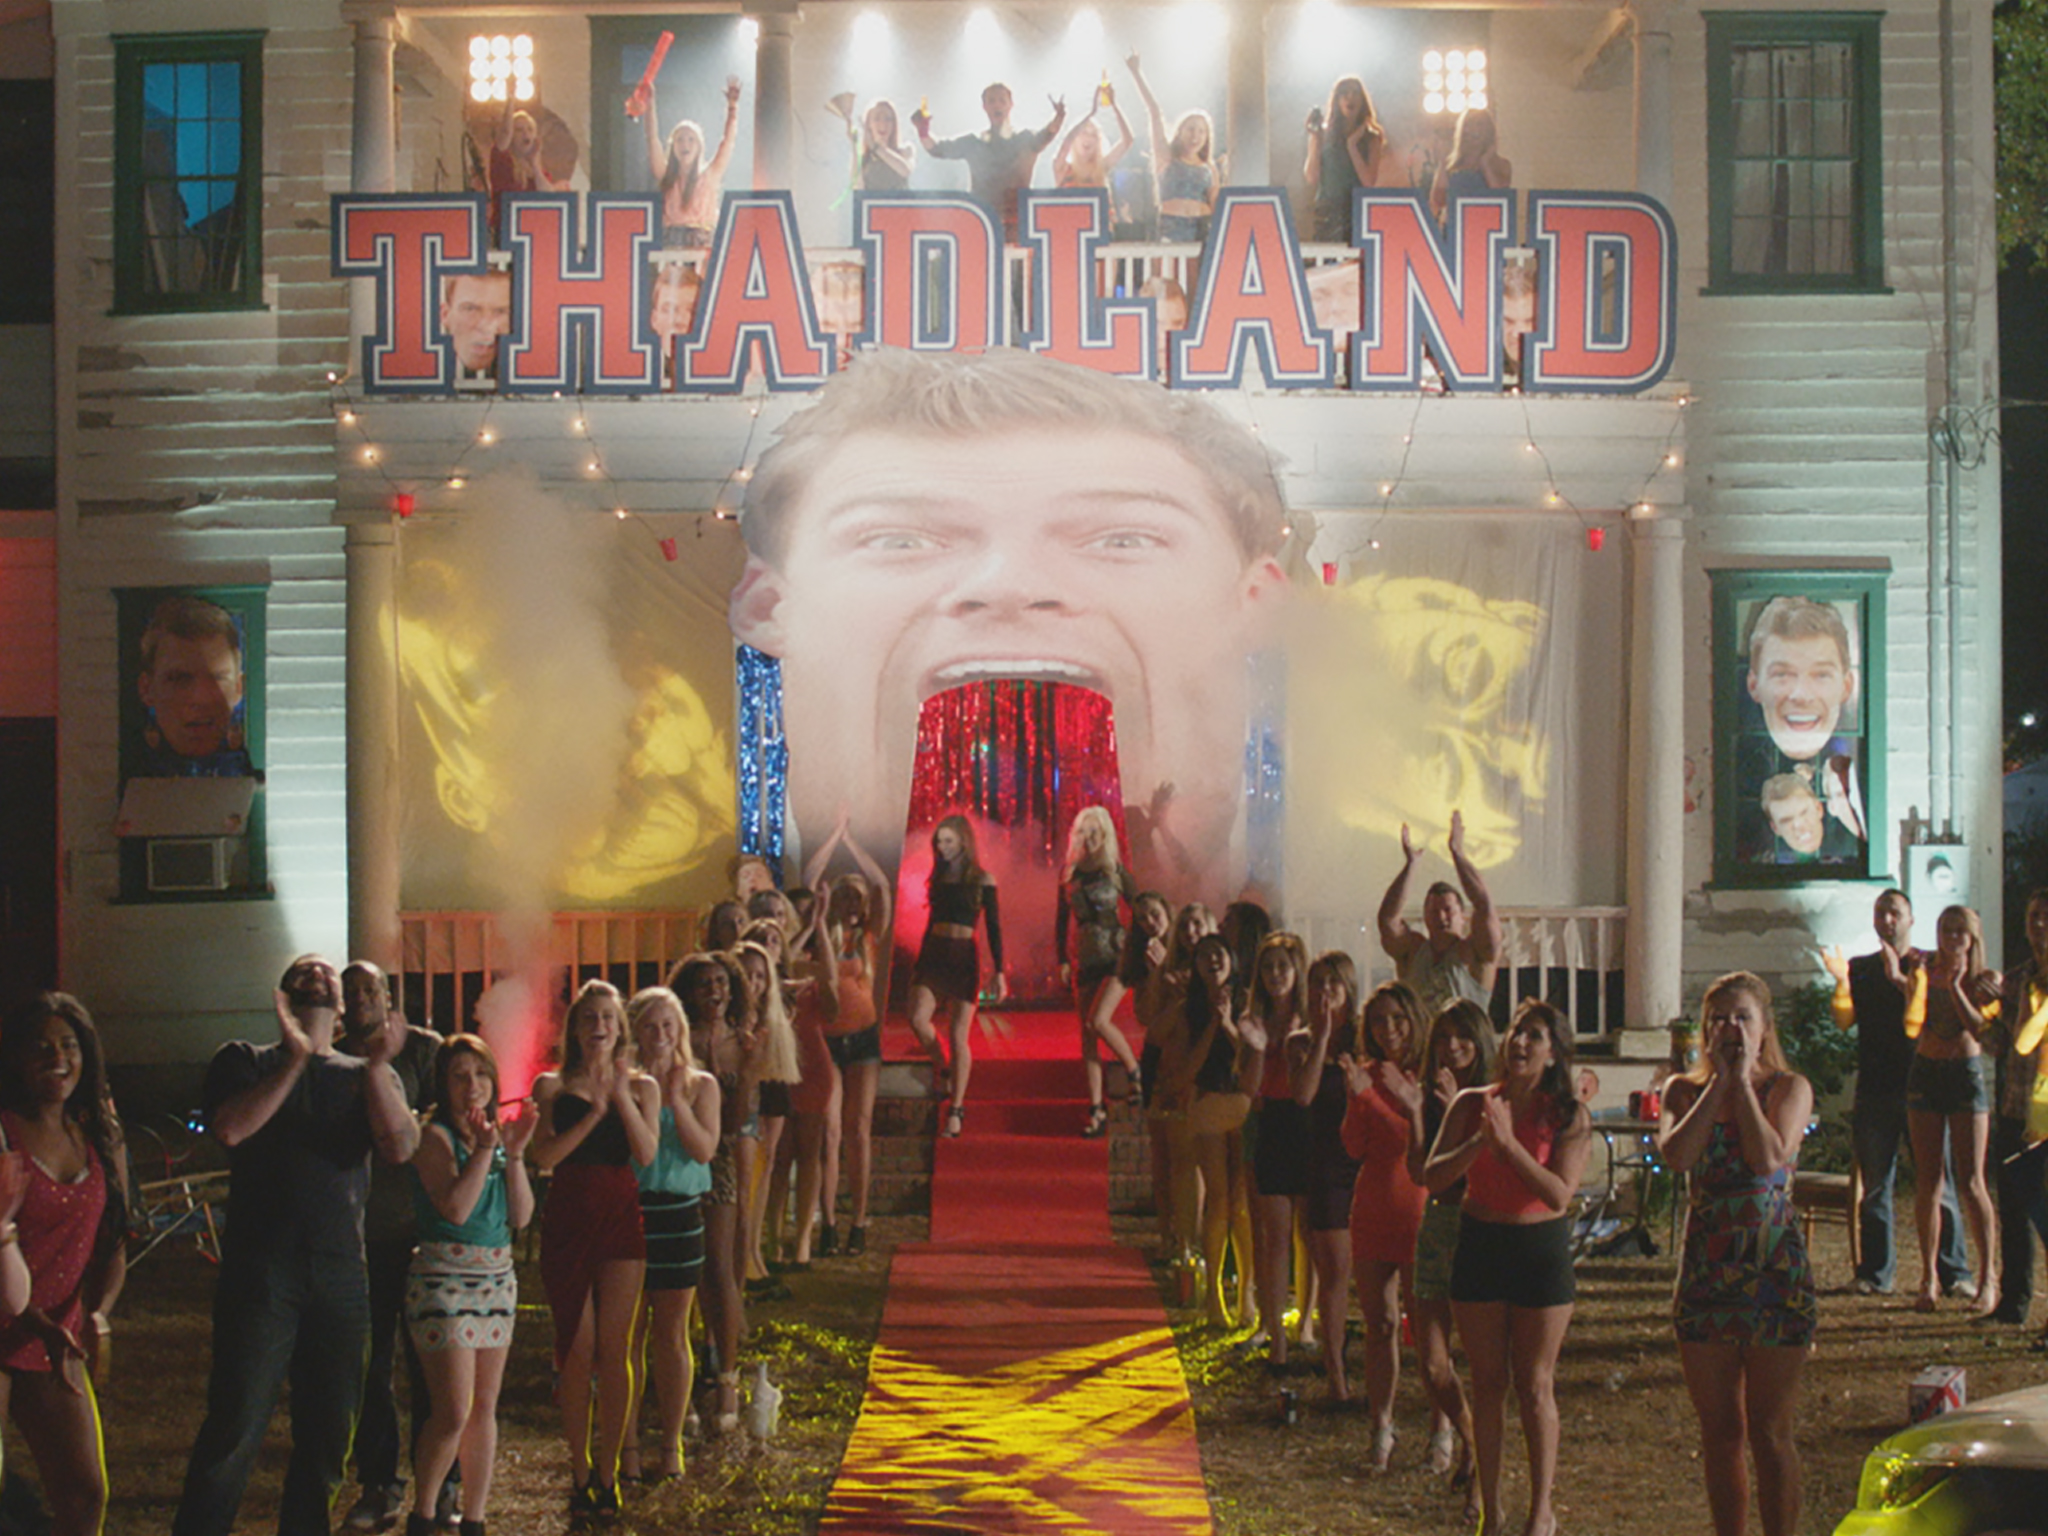 Blue Mountain State - Blue Mountain State: The Rise of Thadland, la bande-annonce ! bms sg 13